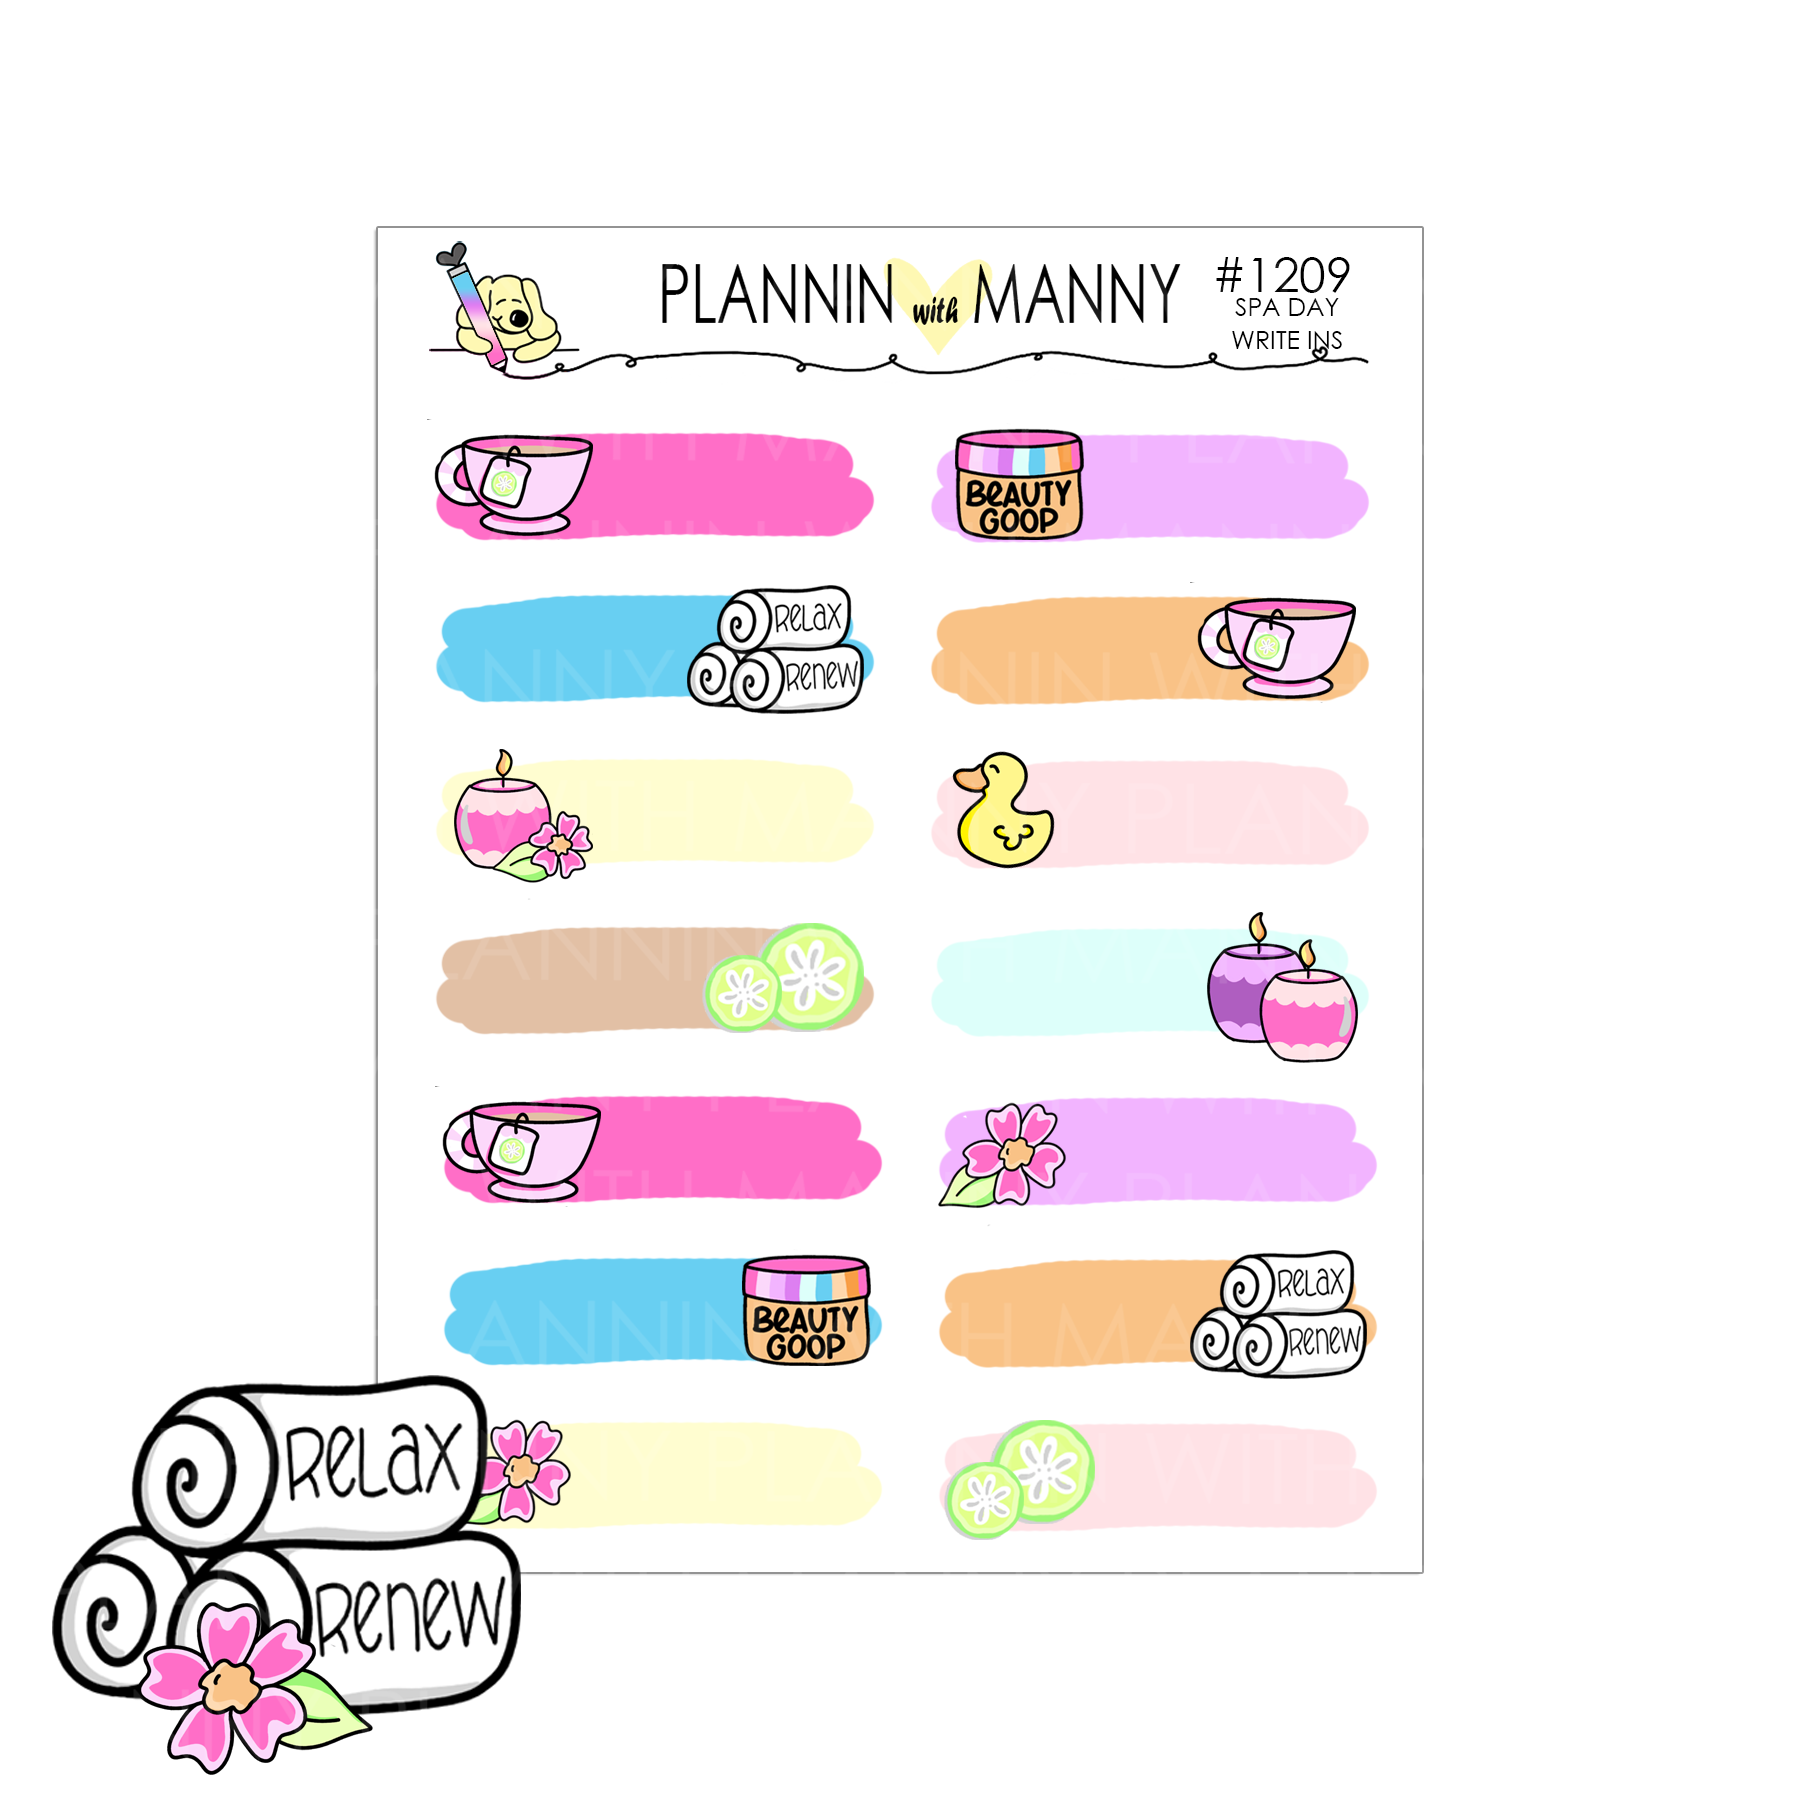 1209 Spa Day Write In Planner Stickers